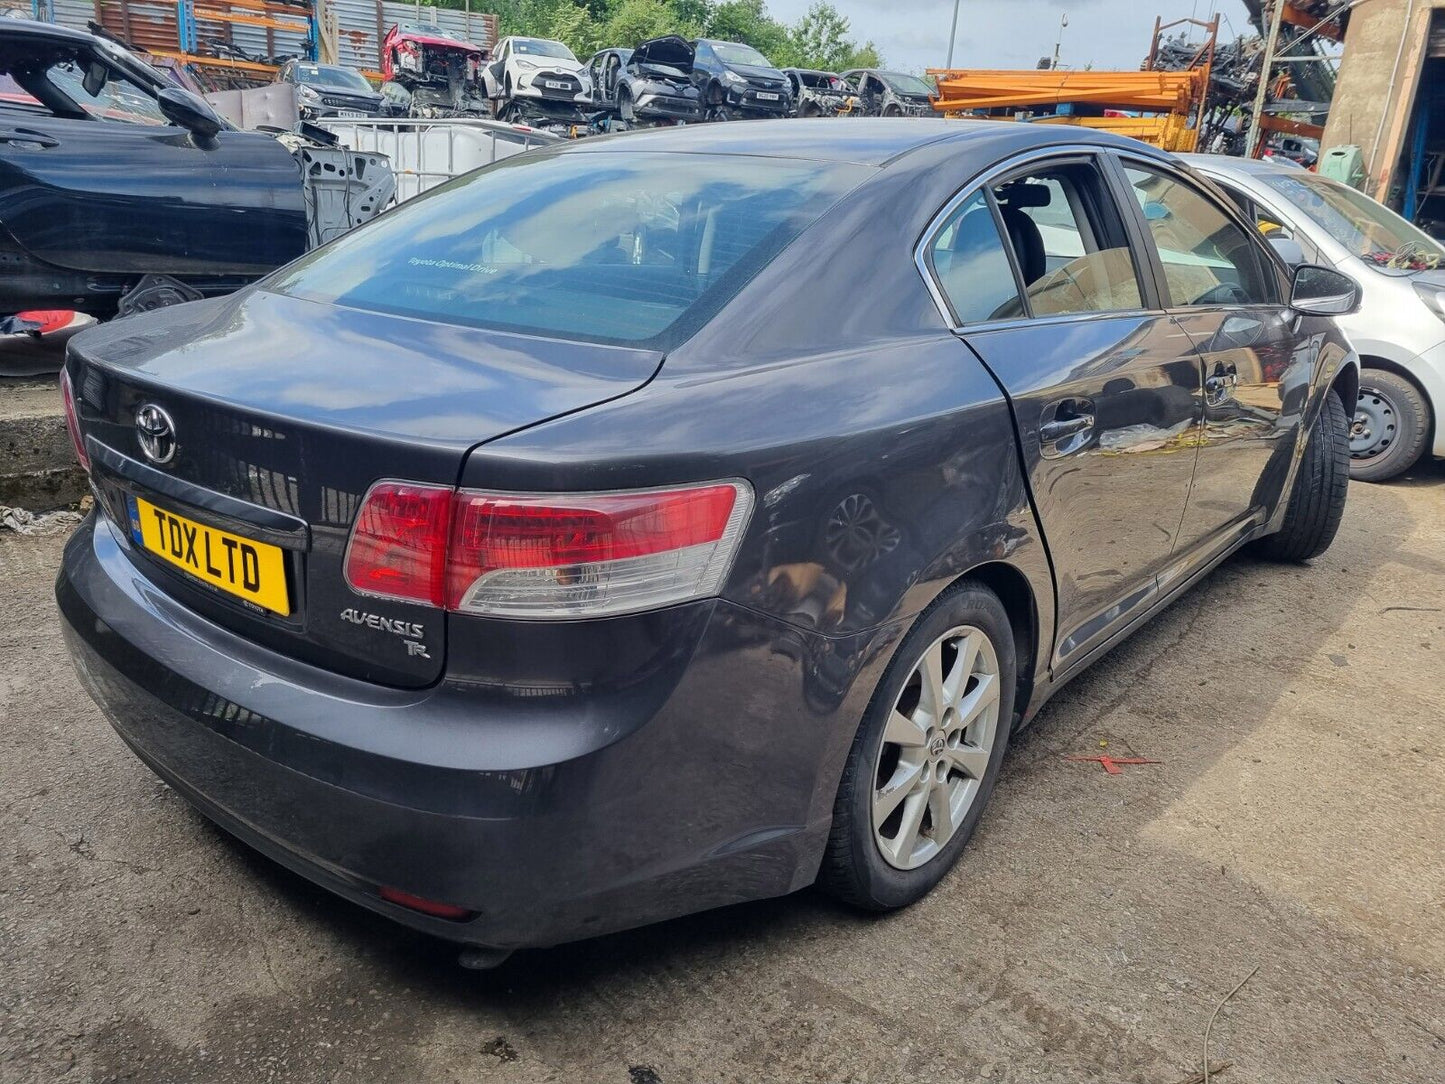 2010 TOYOTA AVENSIS MK3 T27 TR VALVEMATIC 1.6 PETROL MANUAL VEHICLE FOR BREAKING